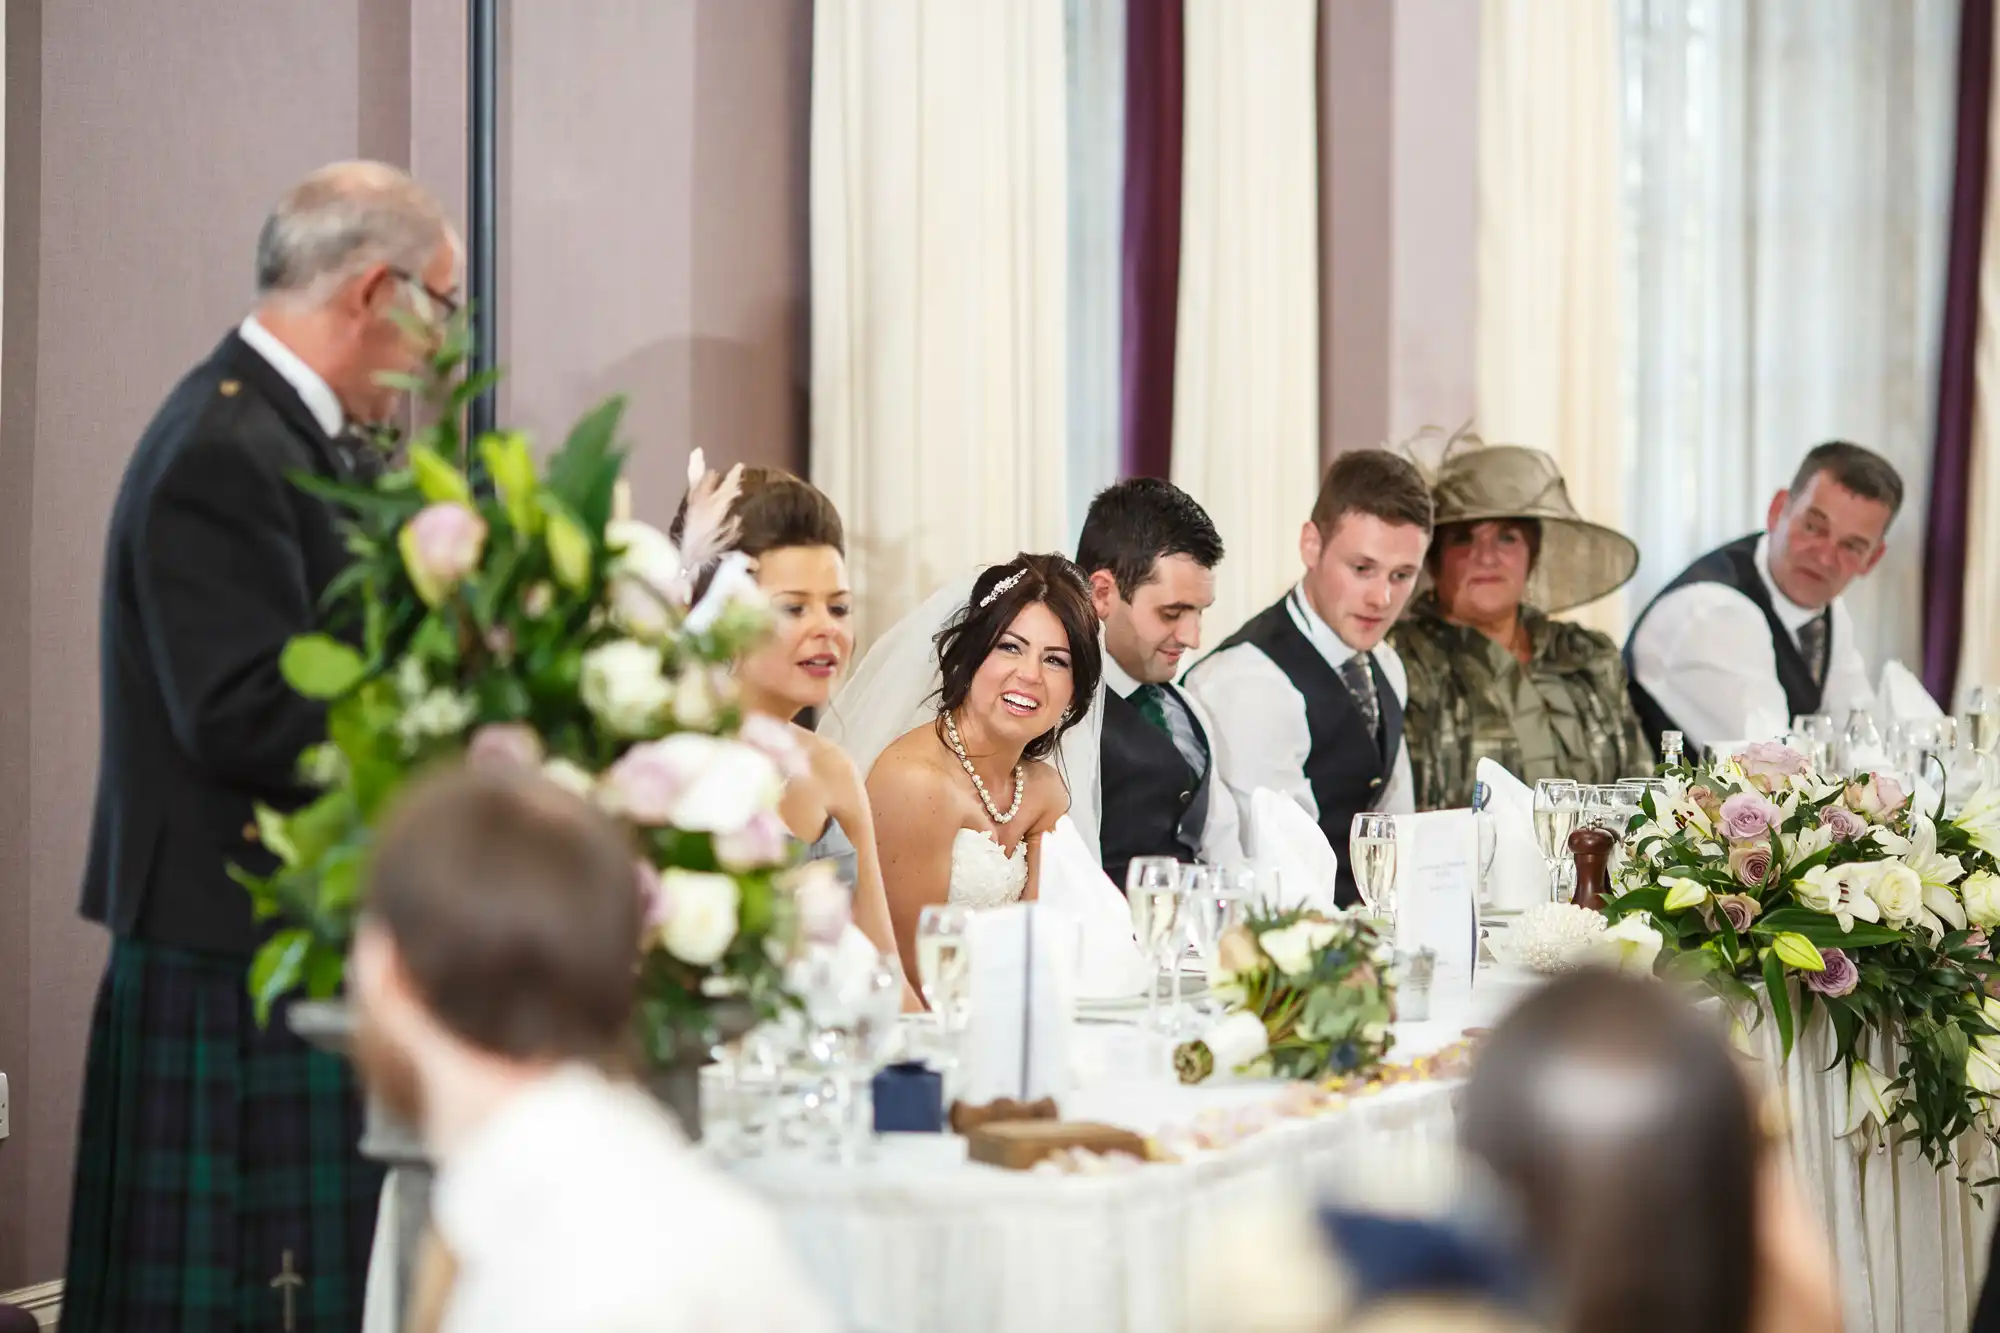 A joyful bride at a wedding reception table laughs with guests, some wearing traditional scottish attire, in an elegantly decorated room.